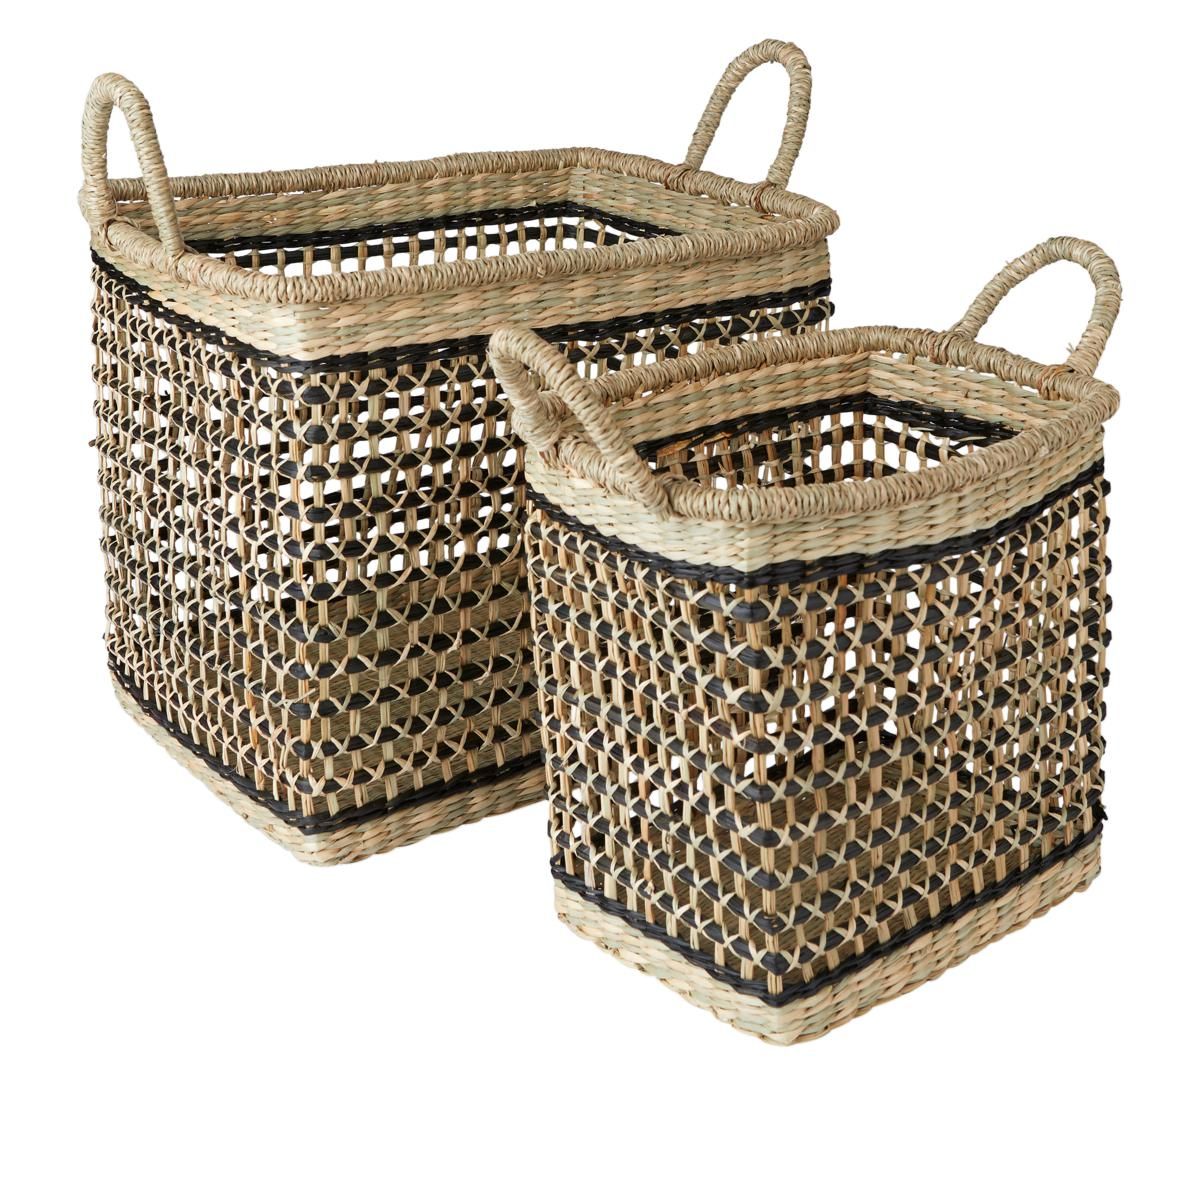 Clover by Jo Set of 2 Seagrass Baskets with Handles - 20307276 | HSN | HSN